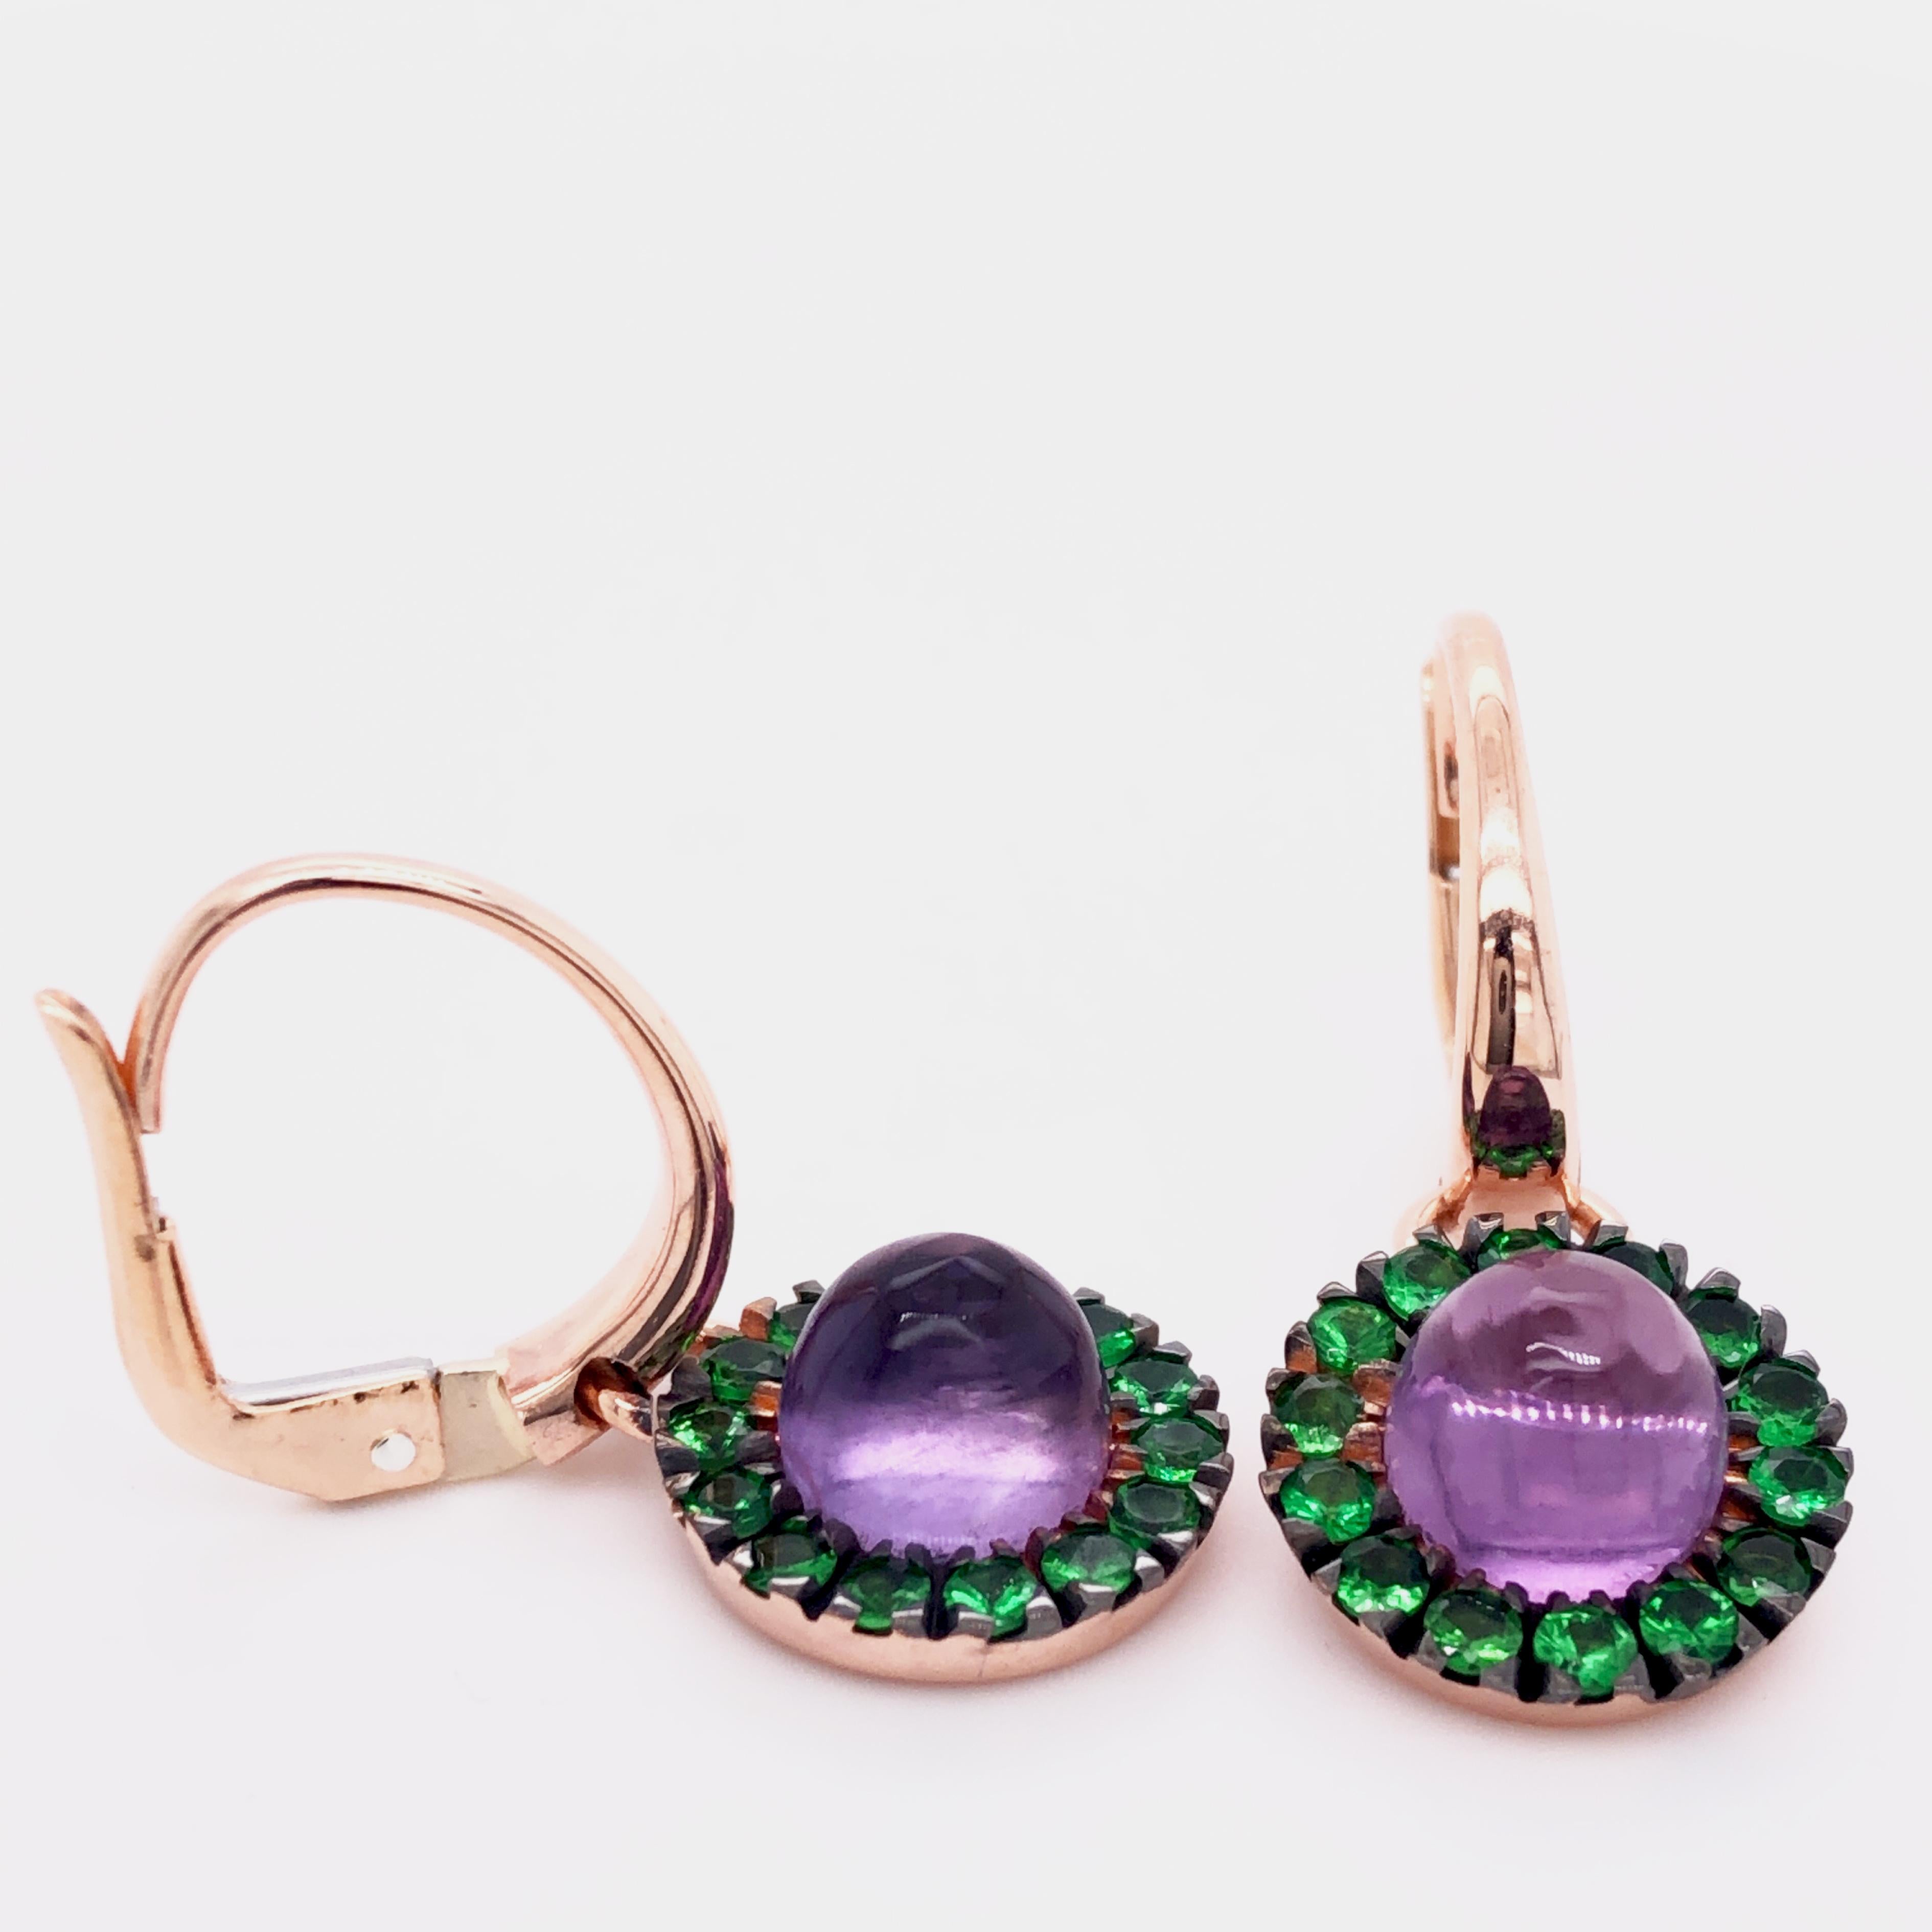 Chic yet timeless 1.20Carat Natural Vivid Green Tsavorite Natural Amethyst Cabochon in a Rose Gold Setting Earrings.
In our smart Tobacco Leather Case and Pouch.
A matching ring is now available.
Total Lenght 1.18 in
